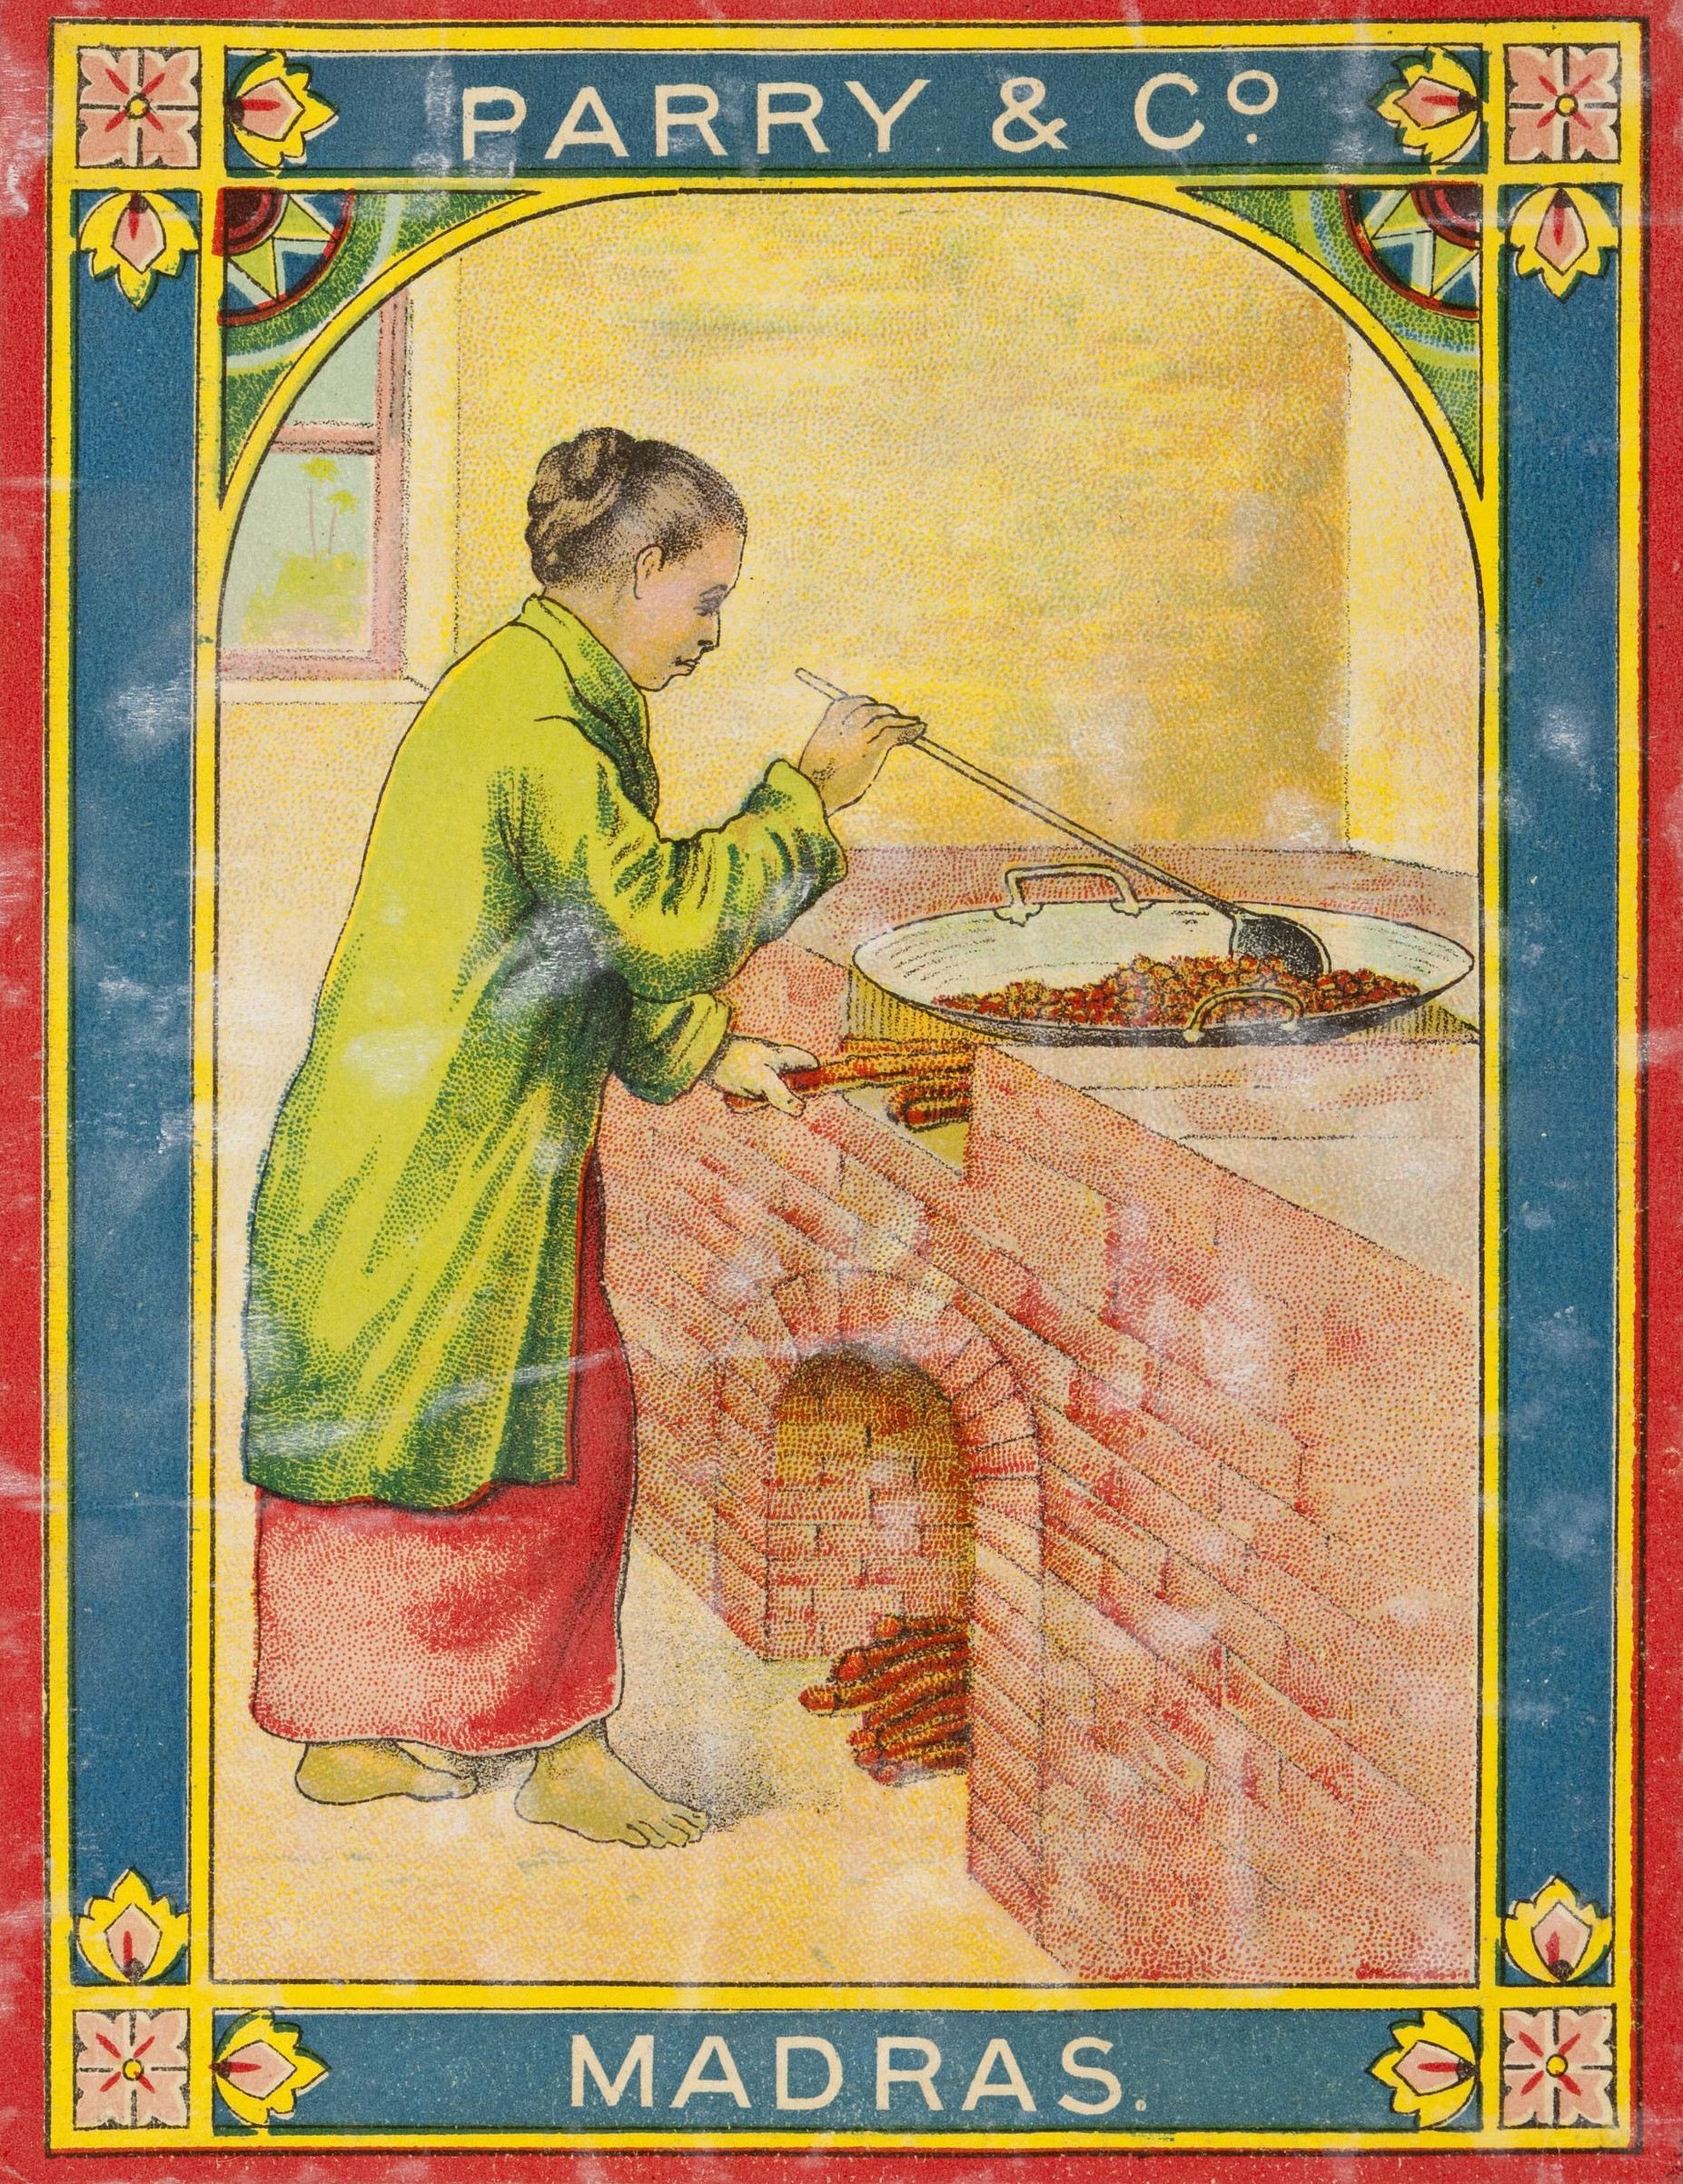 A shipper's ticket from the collection at the Museum of Science and Industry showing a woman ladling food in a pan